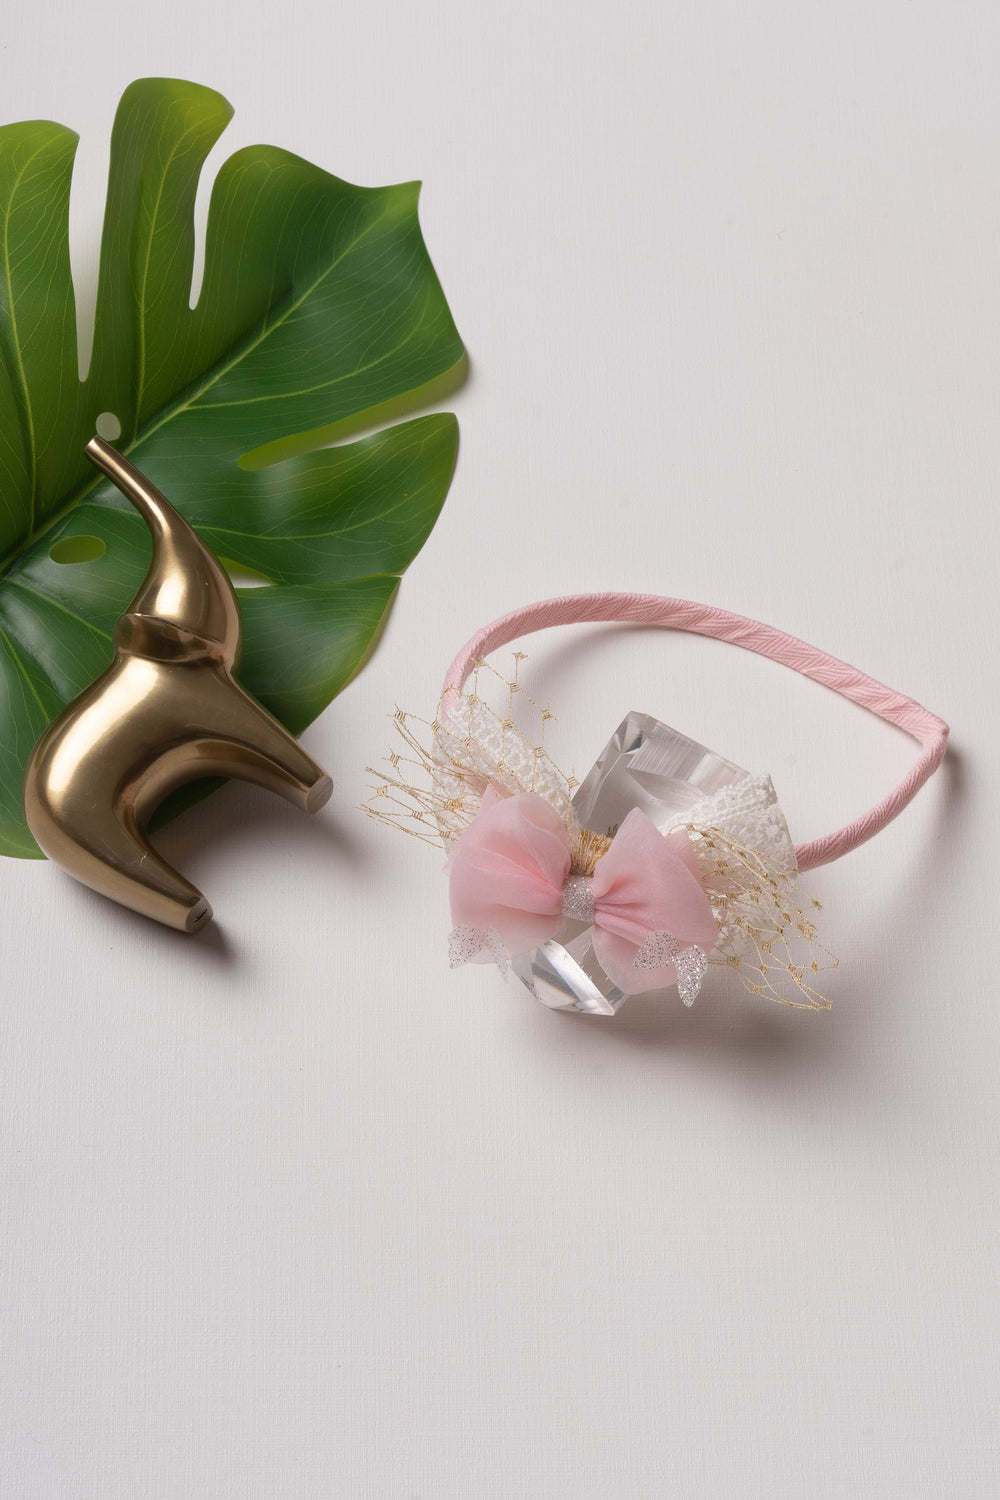 The Nesavu Hair Band Ethereal Pink Butterfly Hairbow with Gold Filigree and Lace Detail Nesavu Pink JHB79A Pink Bow with Lace and Gold Detail | Whimsical Hair Accessory for All Ages | The Nesavu